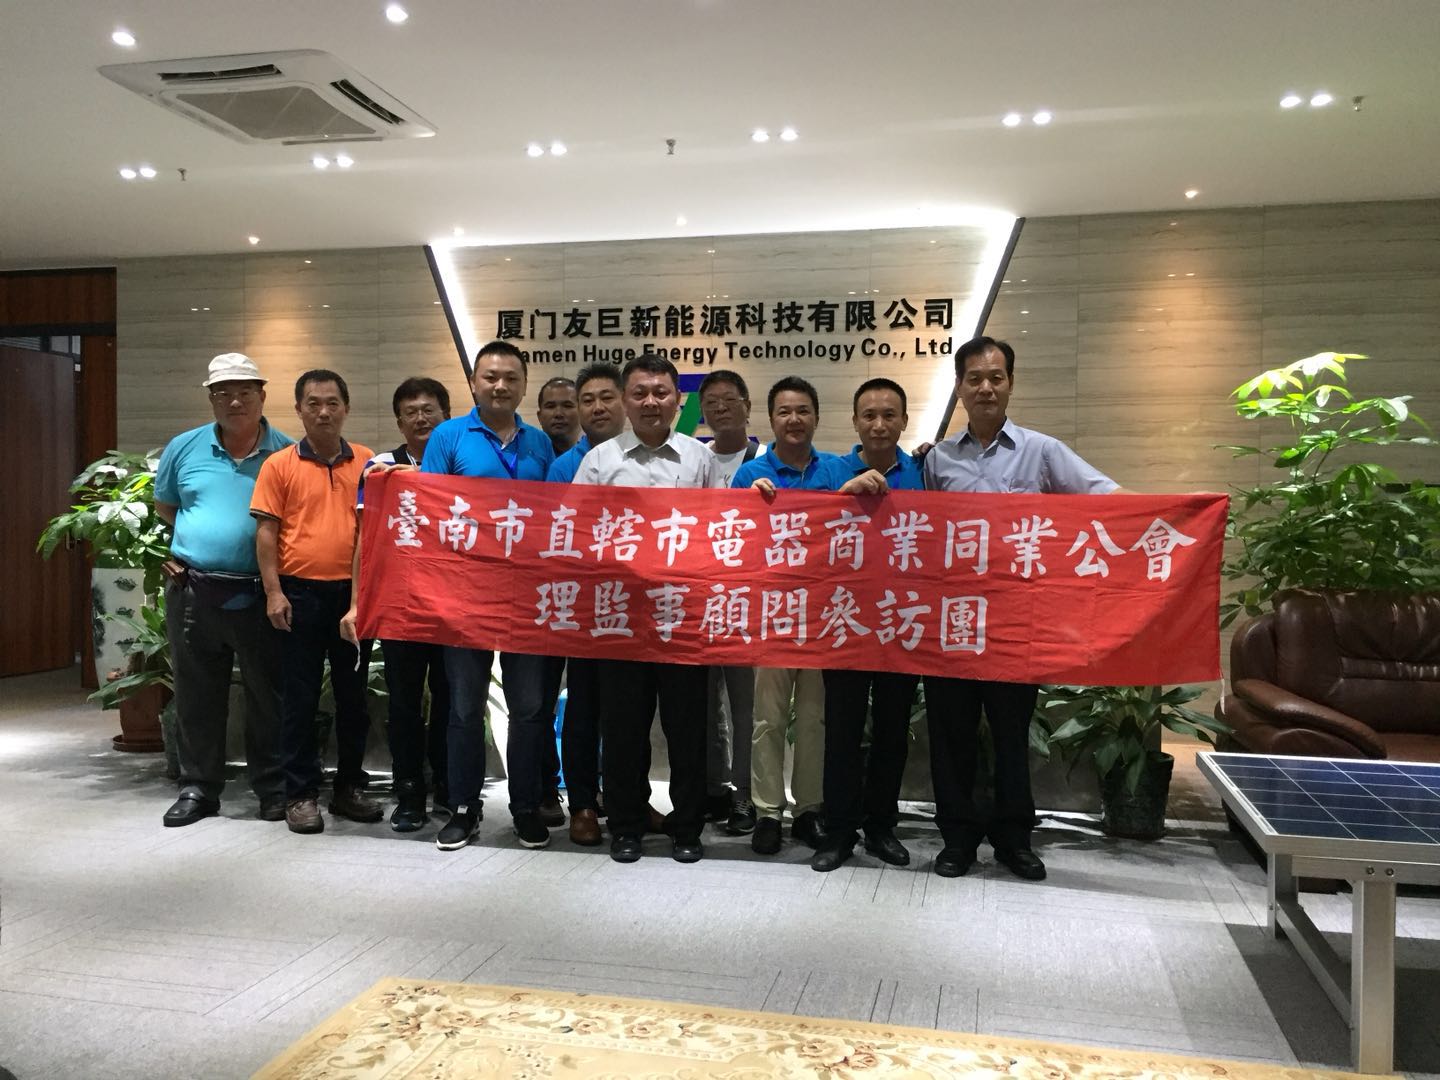 Taiwan Tainan Electric Appliances Business Association and Taiwan Green Energy Environmental Protection Committee leaders visiting